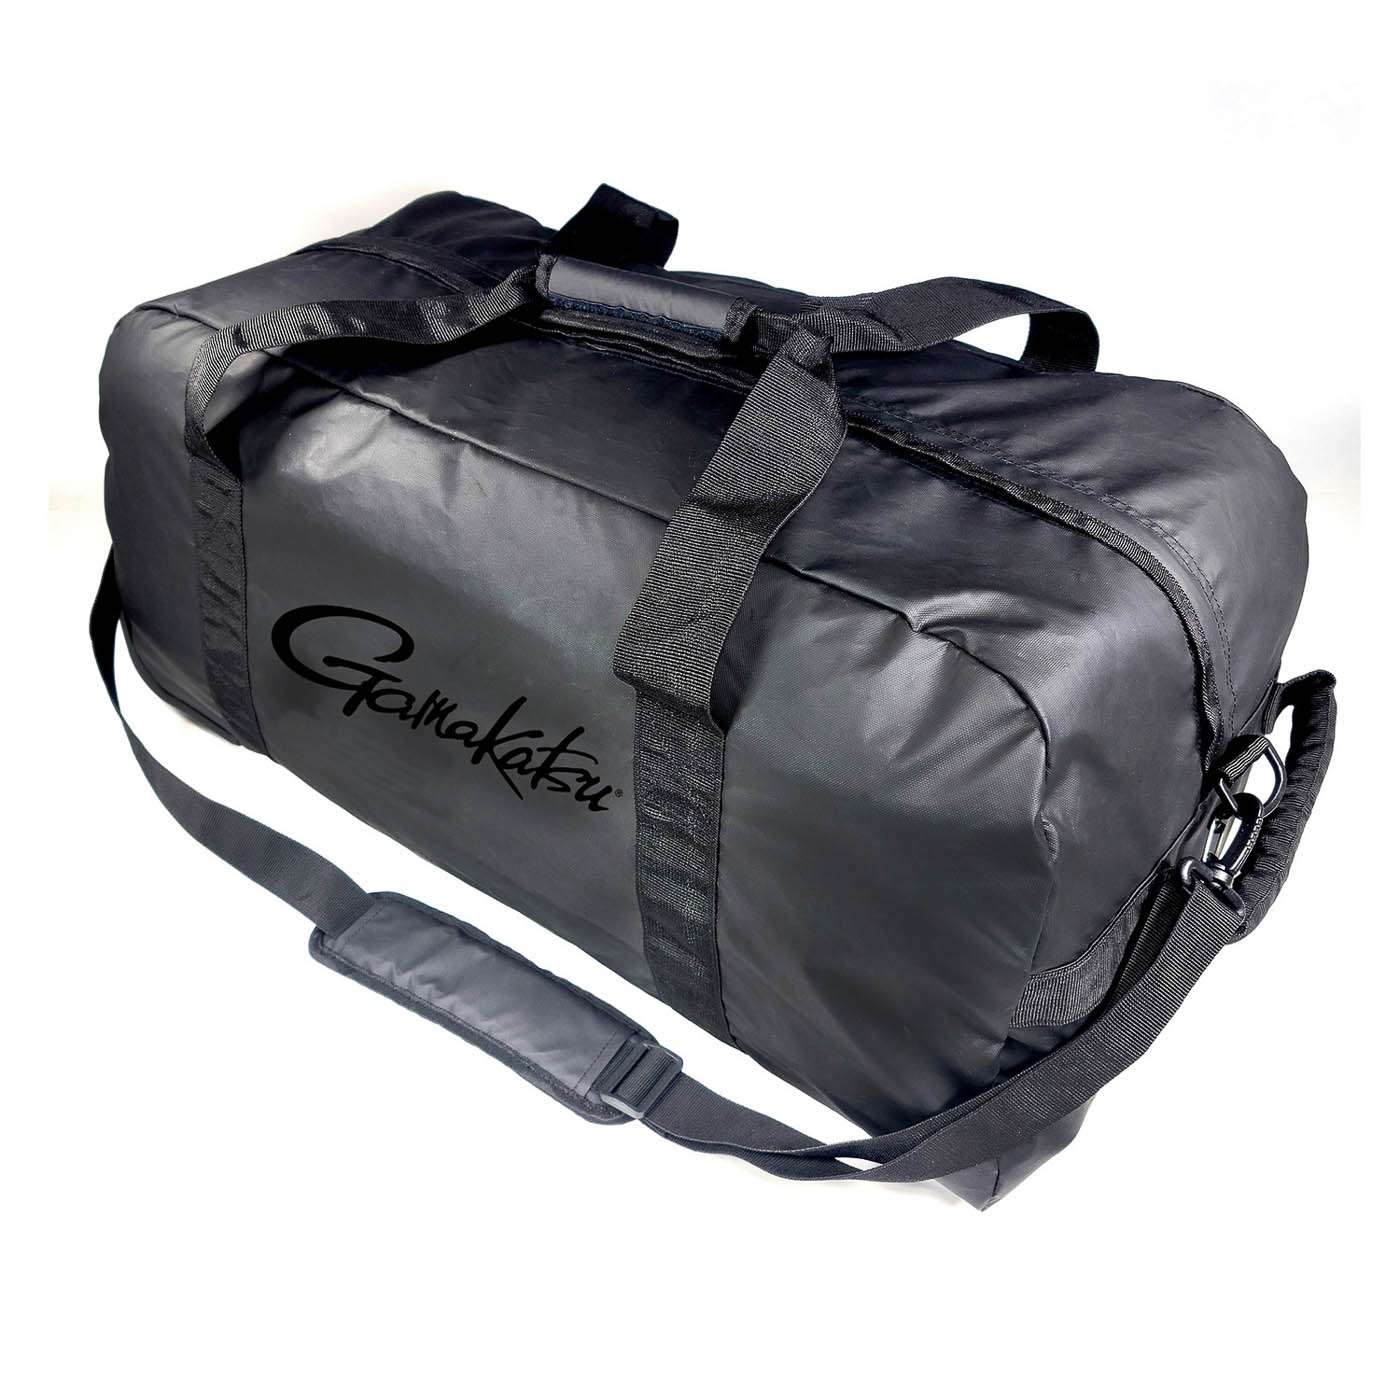 <p><strong>Gamakatsu Rolling Gear Duffel-90L</strong></p><p>For those that prefer to roll along, Gamakatsu offers the Rolling Gear Duffel. The pair of sturdy wheels allow for easy transport of 90 liters of belongings. When anglers decide to pick it up, use the adjustable, removable padded shoulder strap or padded handles to carry in comfort. An external zippered pocket and a large inner zippered pocket keep things tidy. Water-resistant construction keeps the elements at bay, so anglers wonât have to worry about rain clouds or rough boat rides. A convenient carrying case allows compact storage when anglers are not on the road or at the lake. <a href=